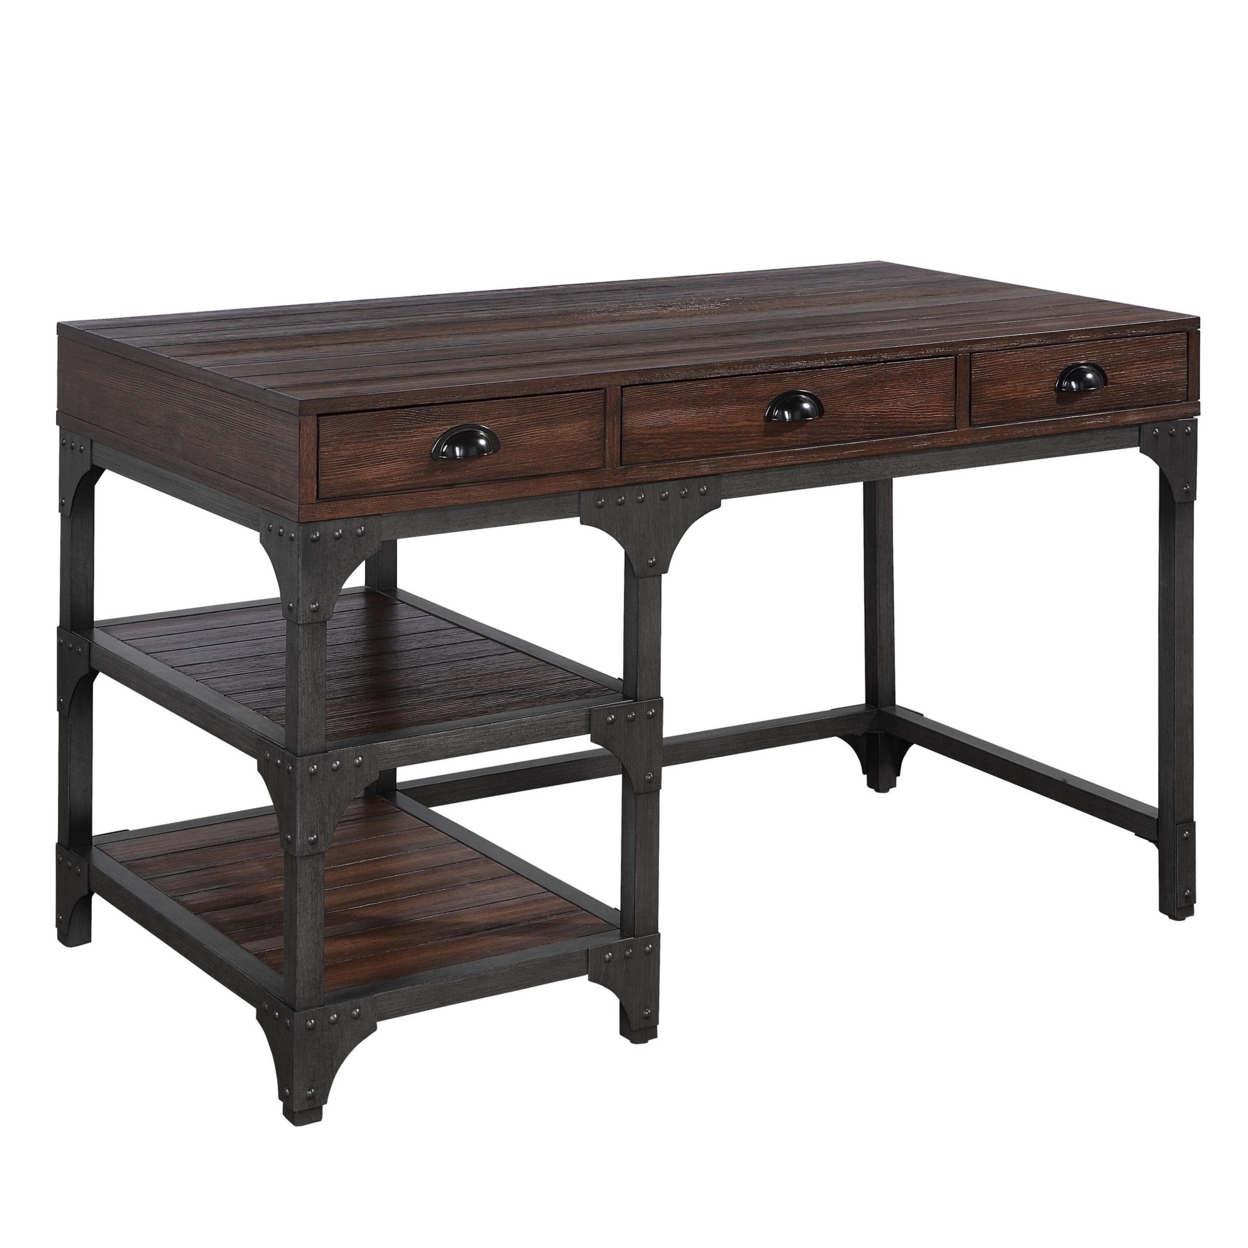 Writing Desk With 3 Drawers And Plank Details, Brown- Saltoro Sherpi